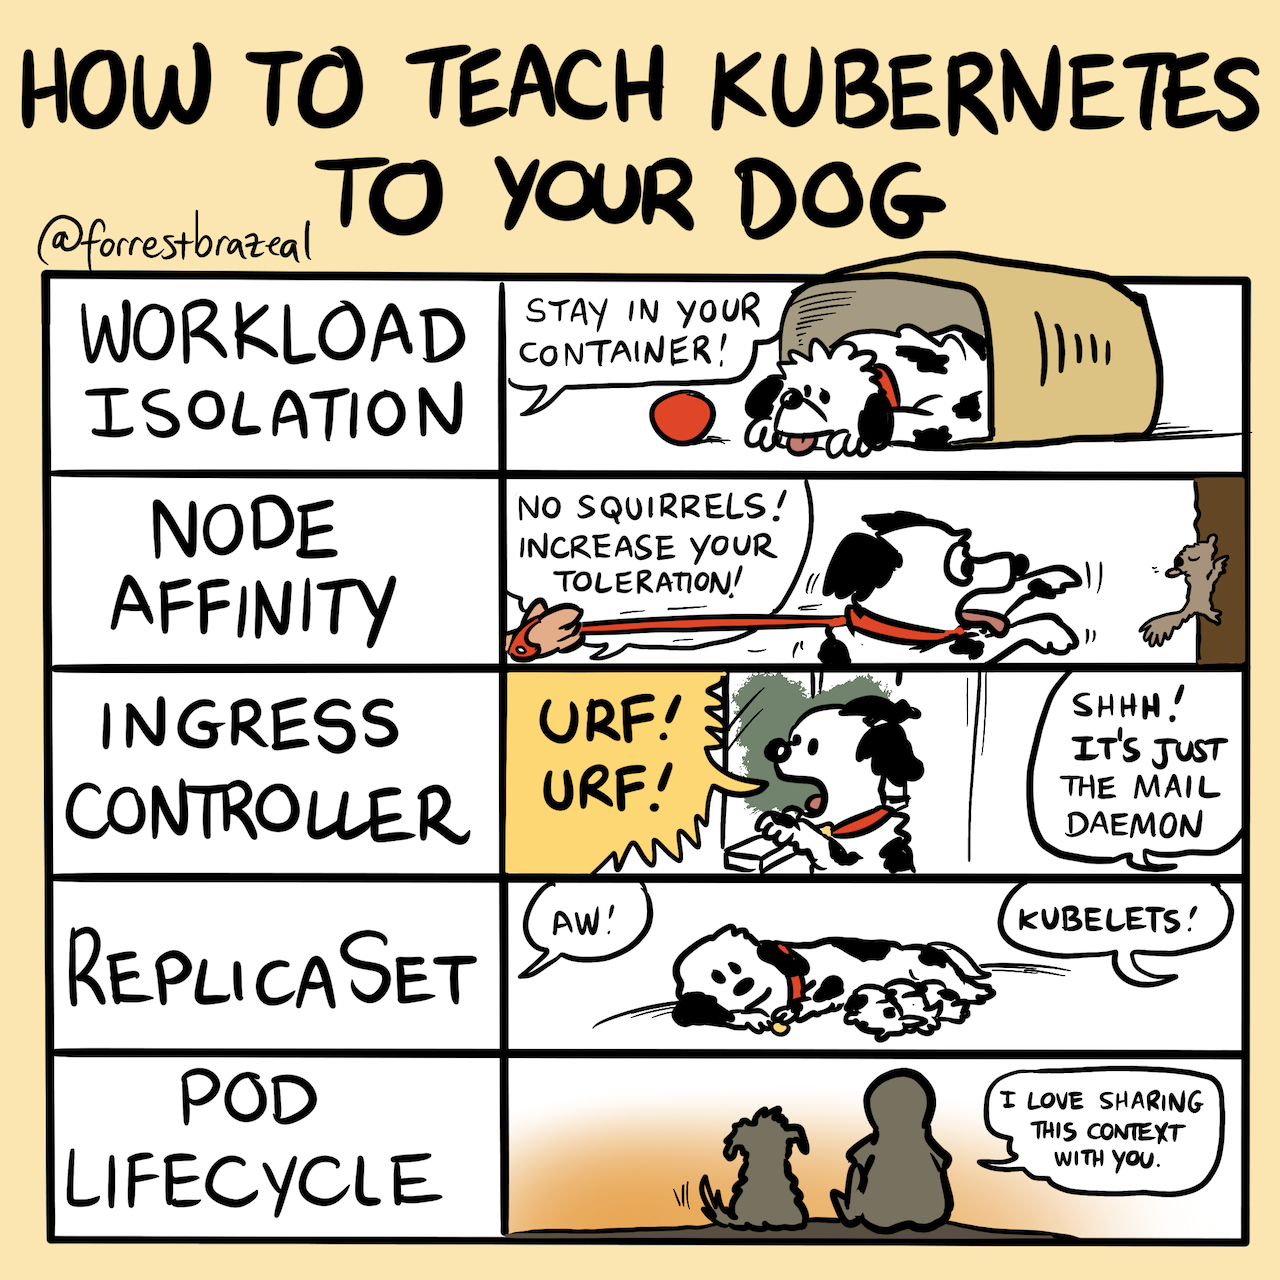 Kubernetes for Dogs